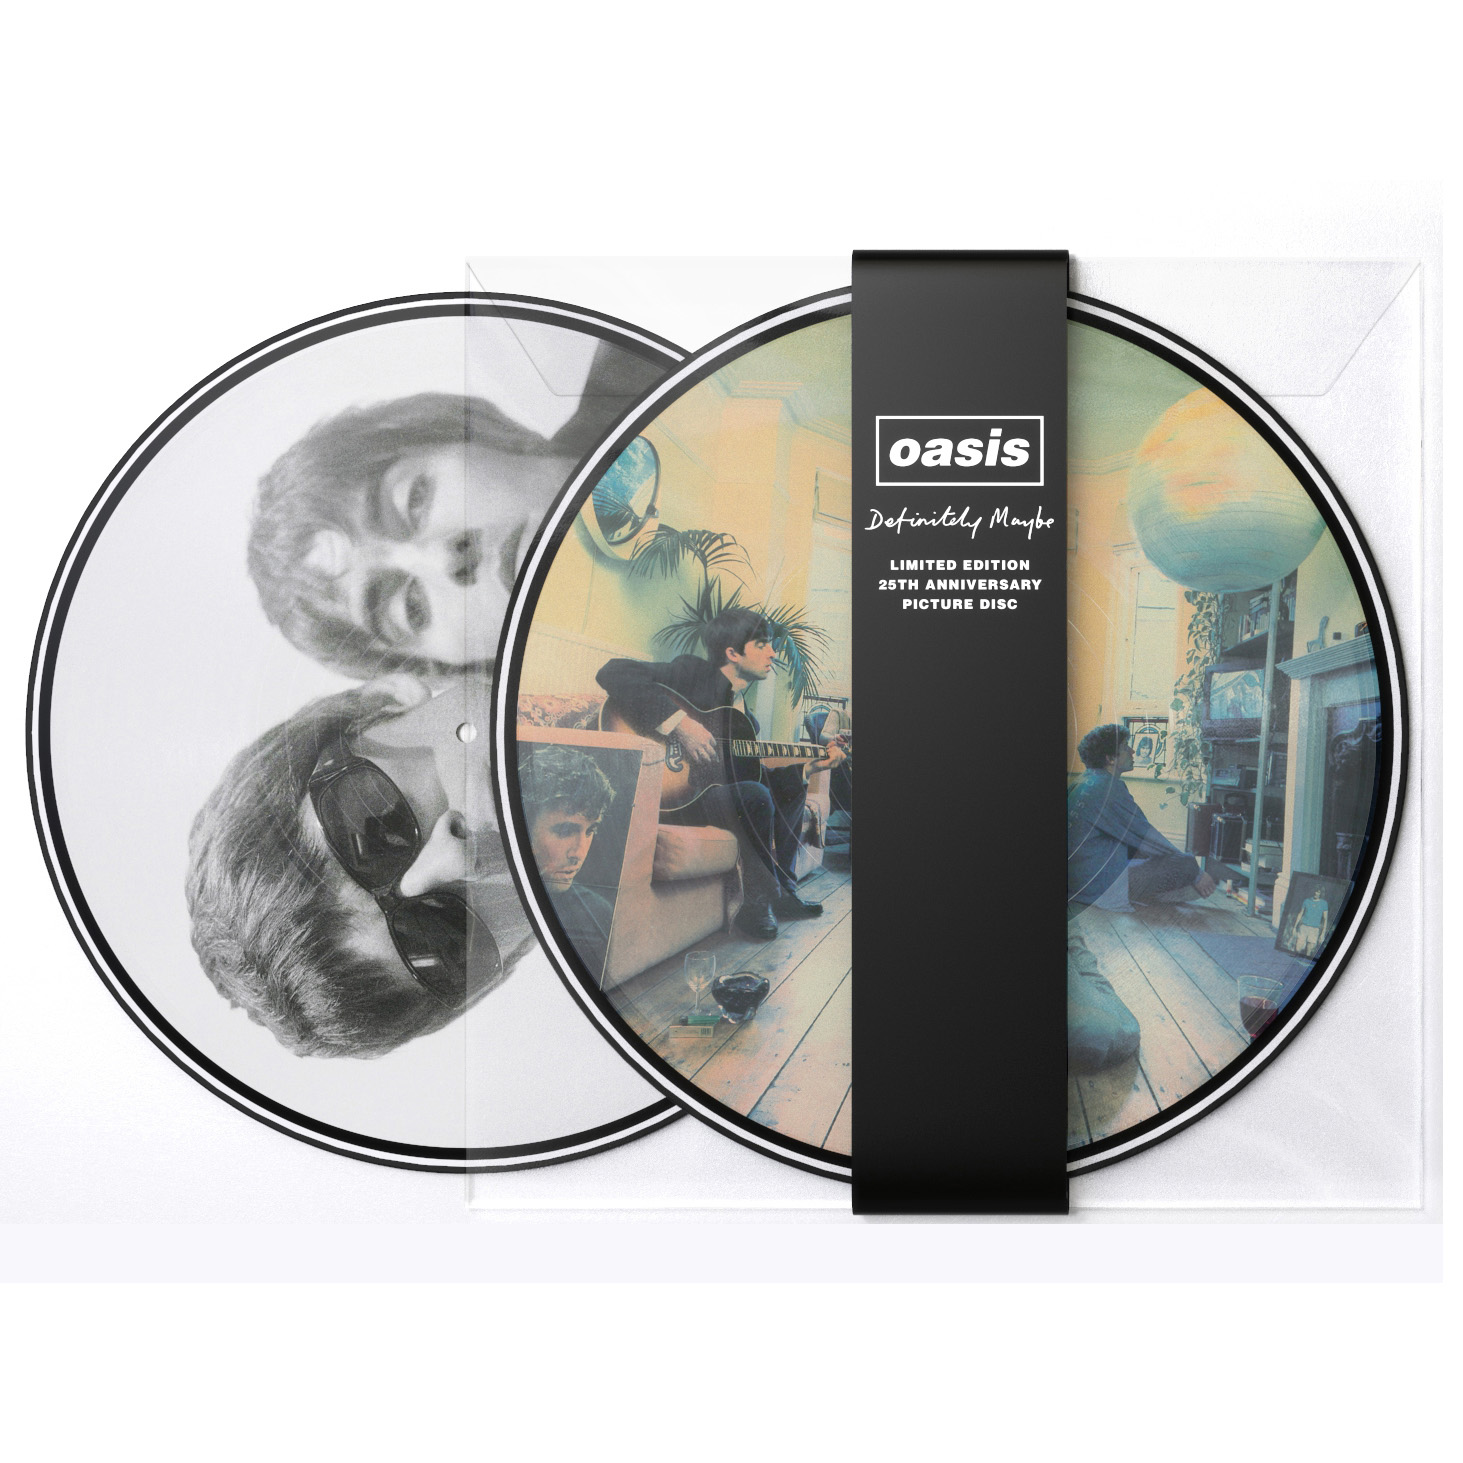 News – Oasis – Definitely Maybe – Une édition picture disc